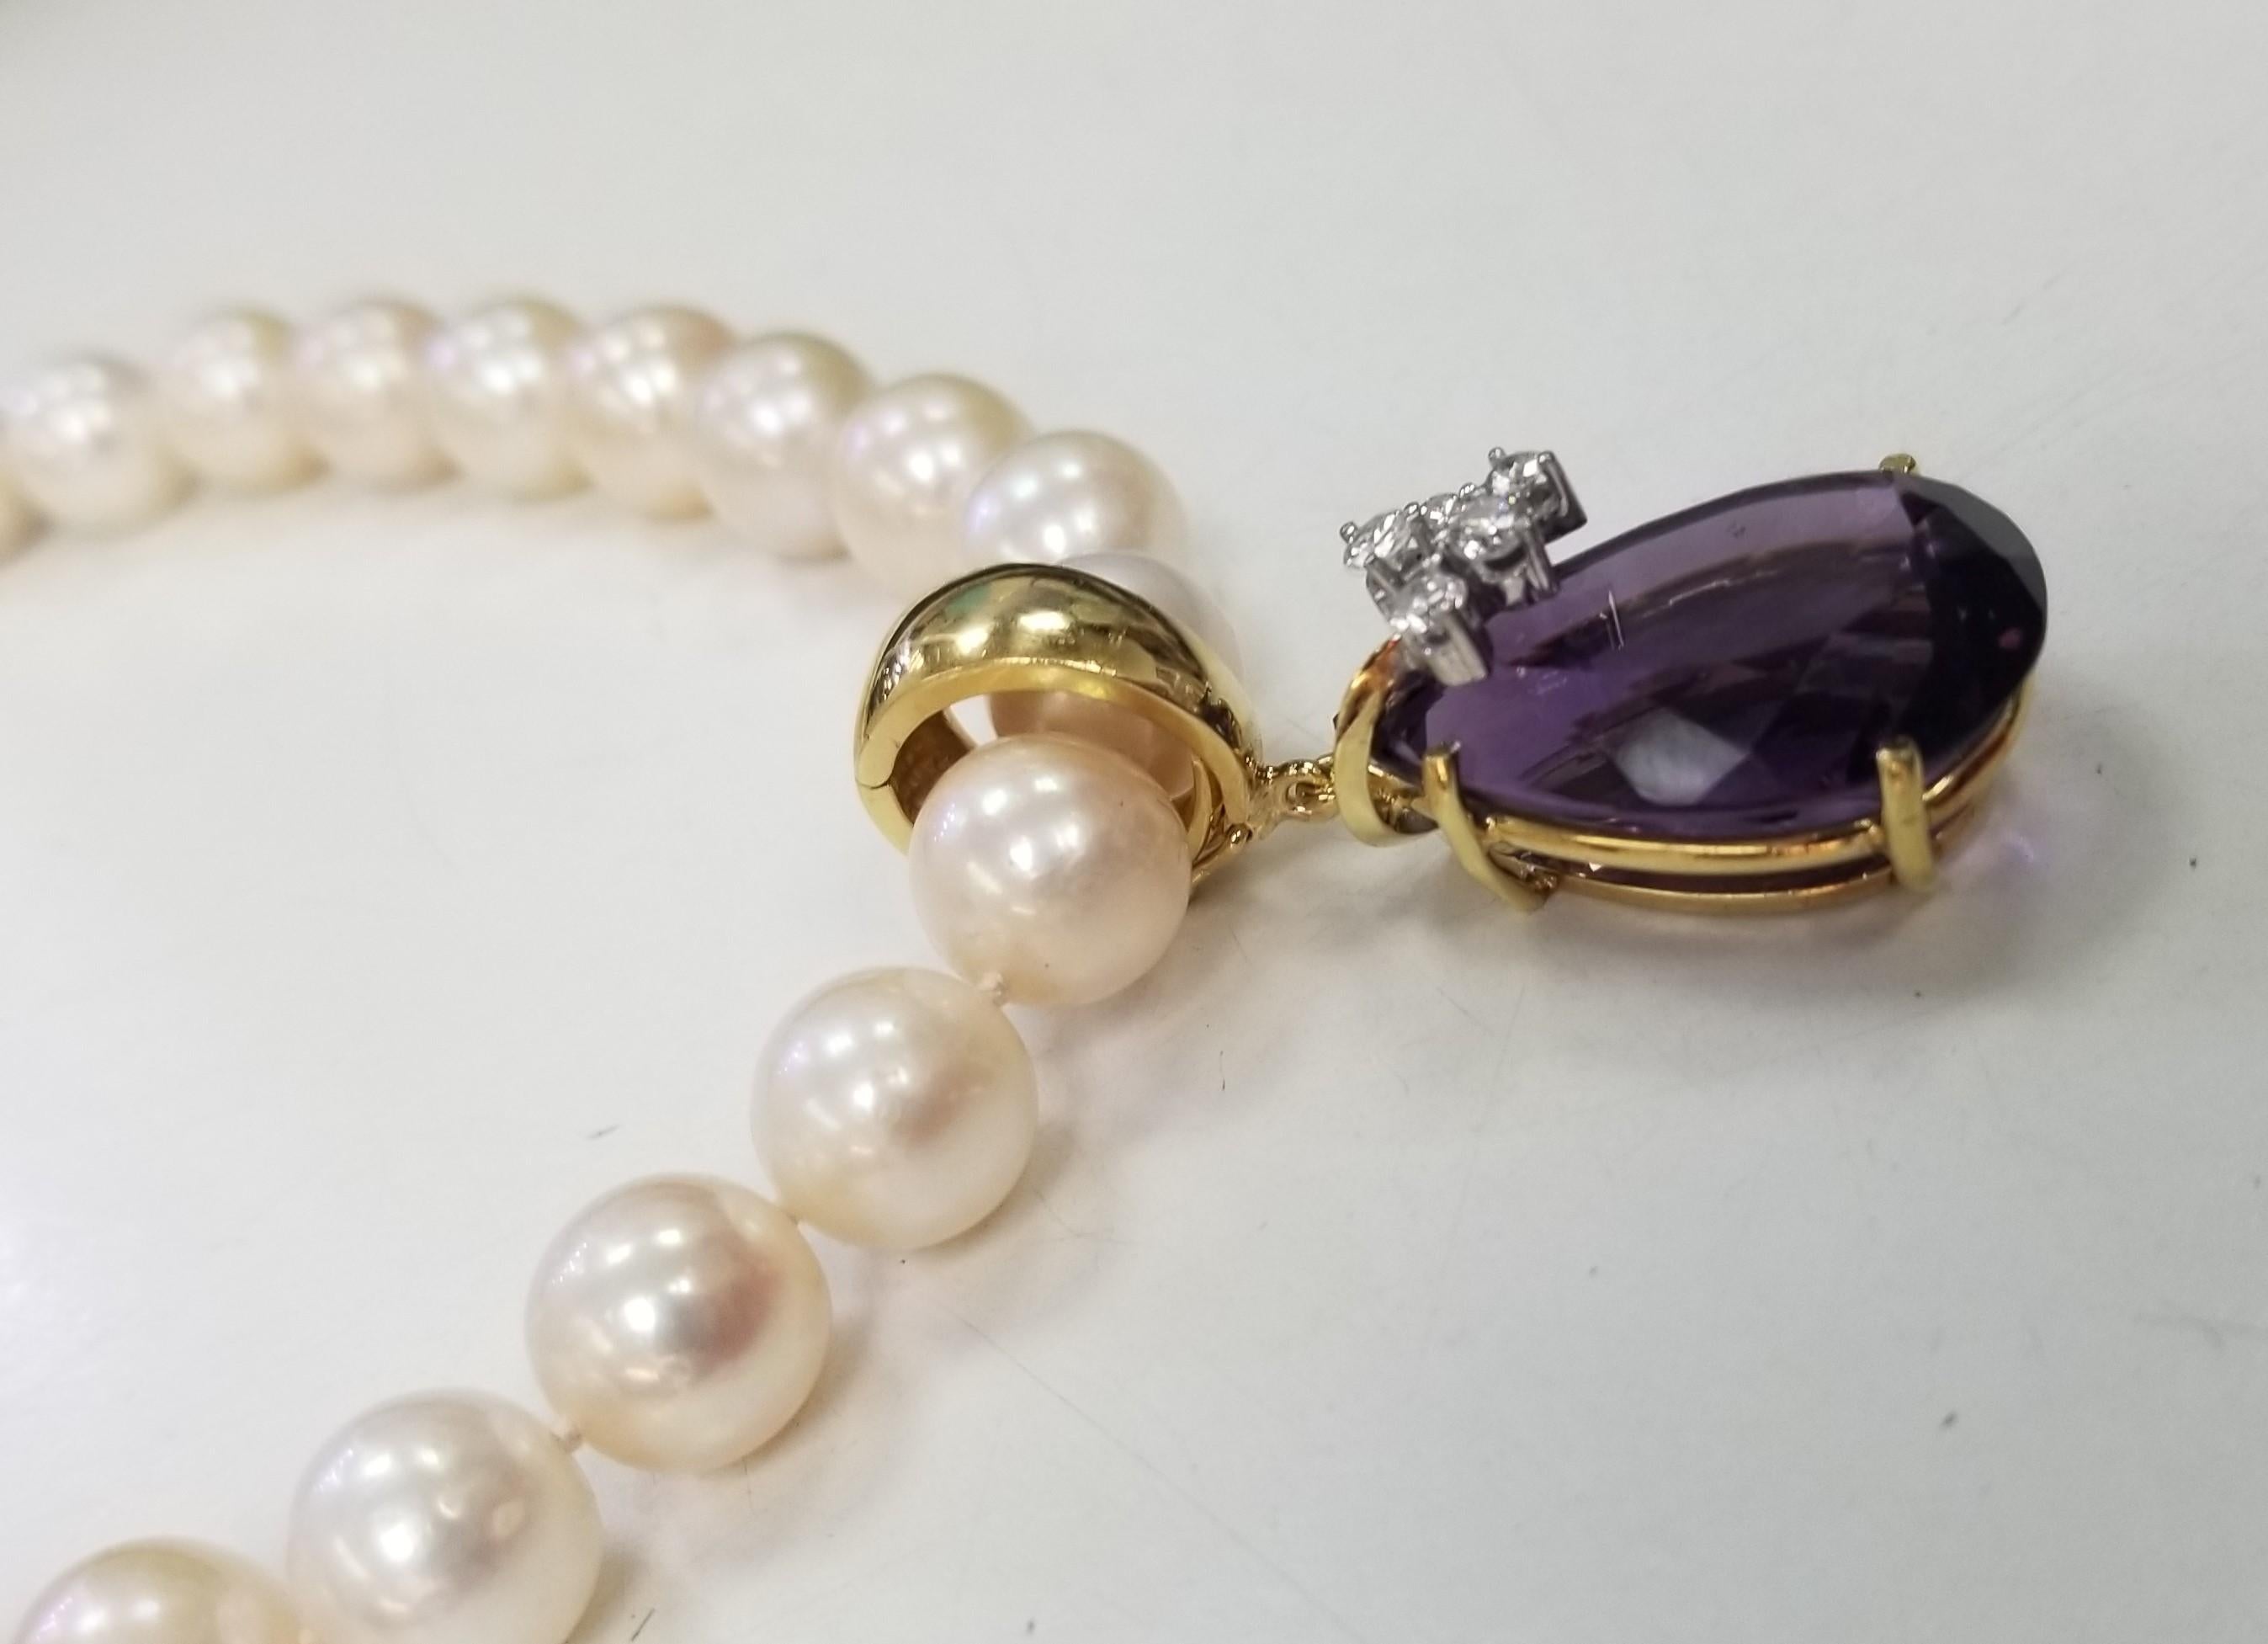 14k Yellow gold amethyst and diamond pendant, containing 1 
pear shape cut amethyst weighing 18.54cts. with 5 round full cut diamonds weighing .35pts. The piece is detachable on a 16 inch 9mm fresh water pearls. 